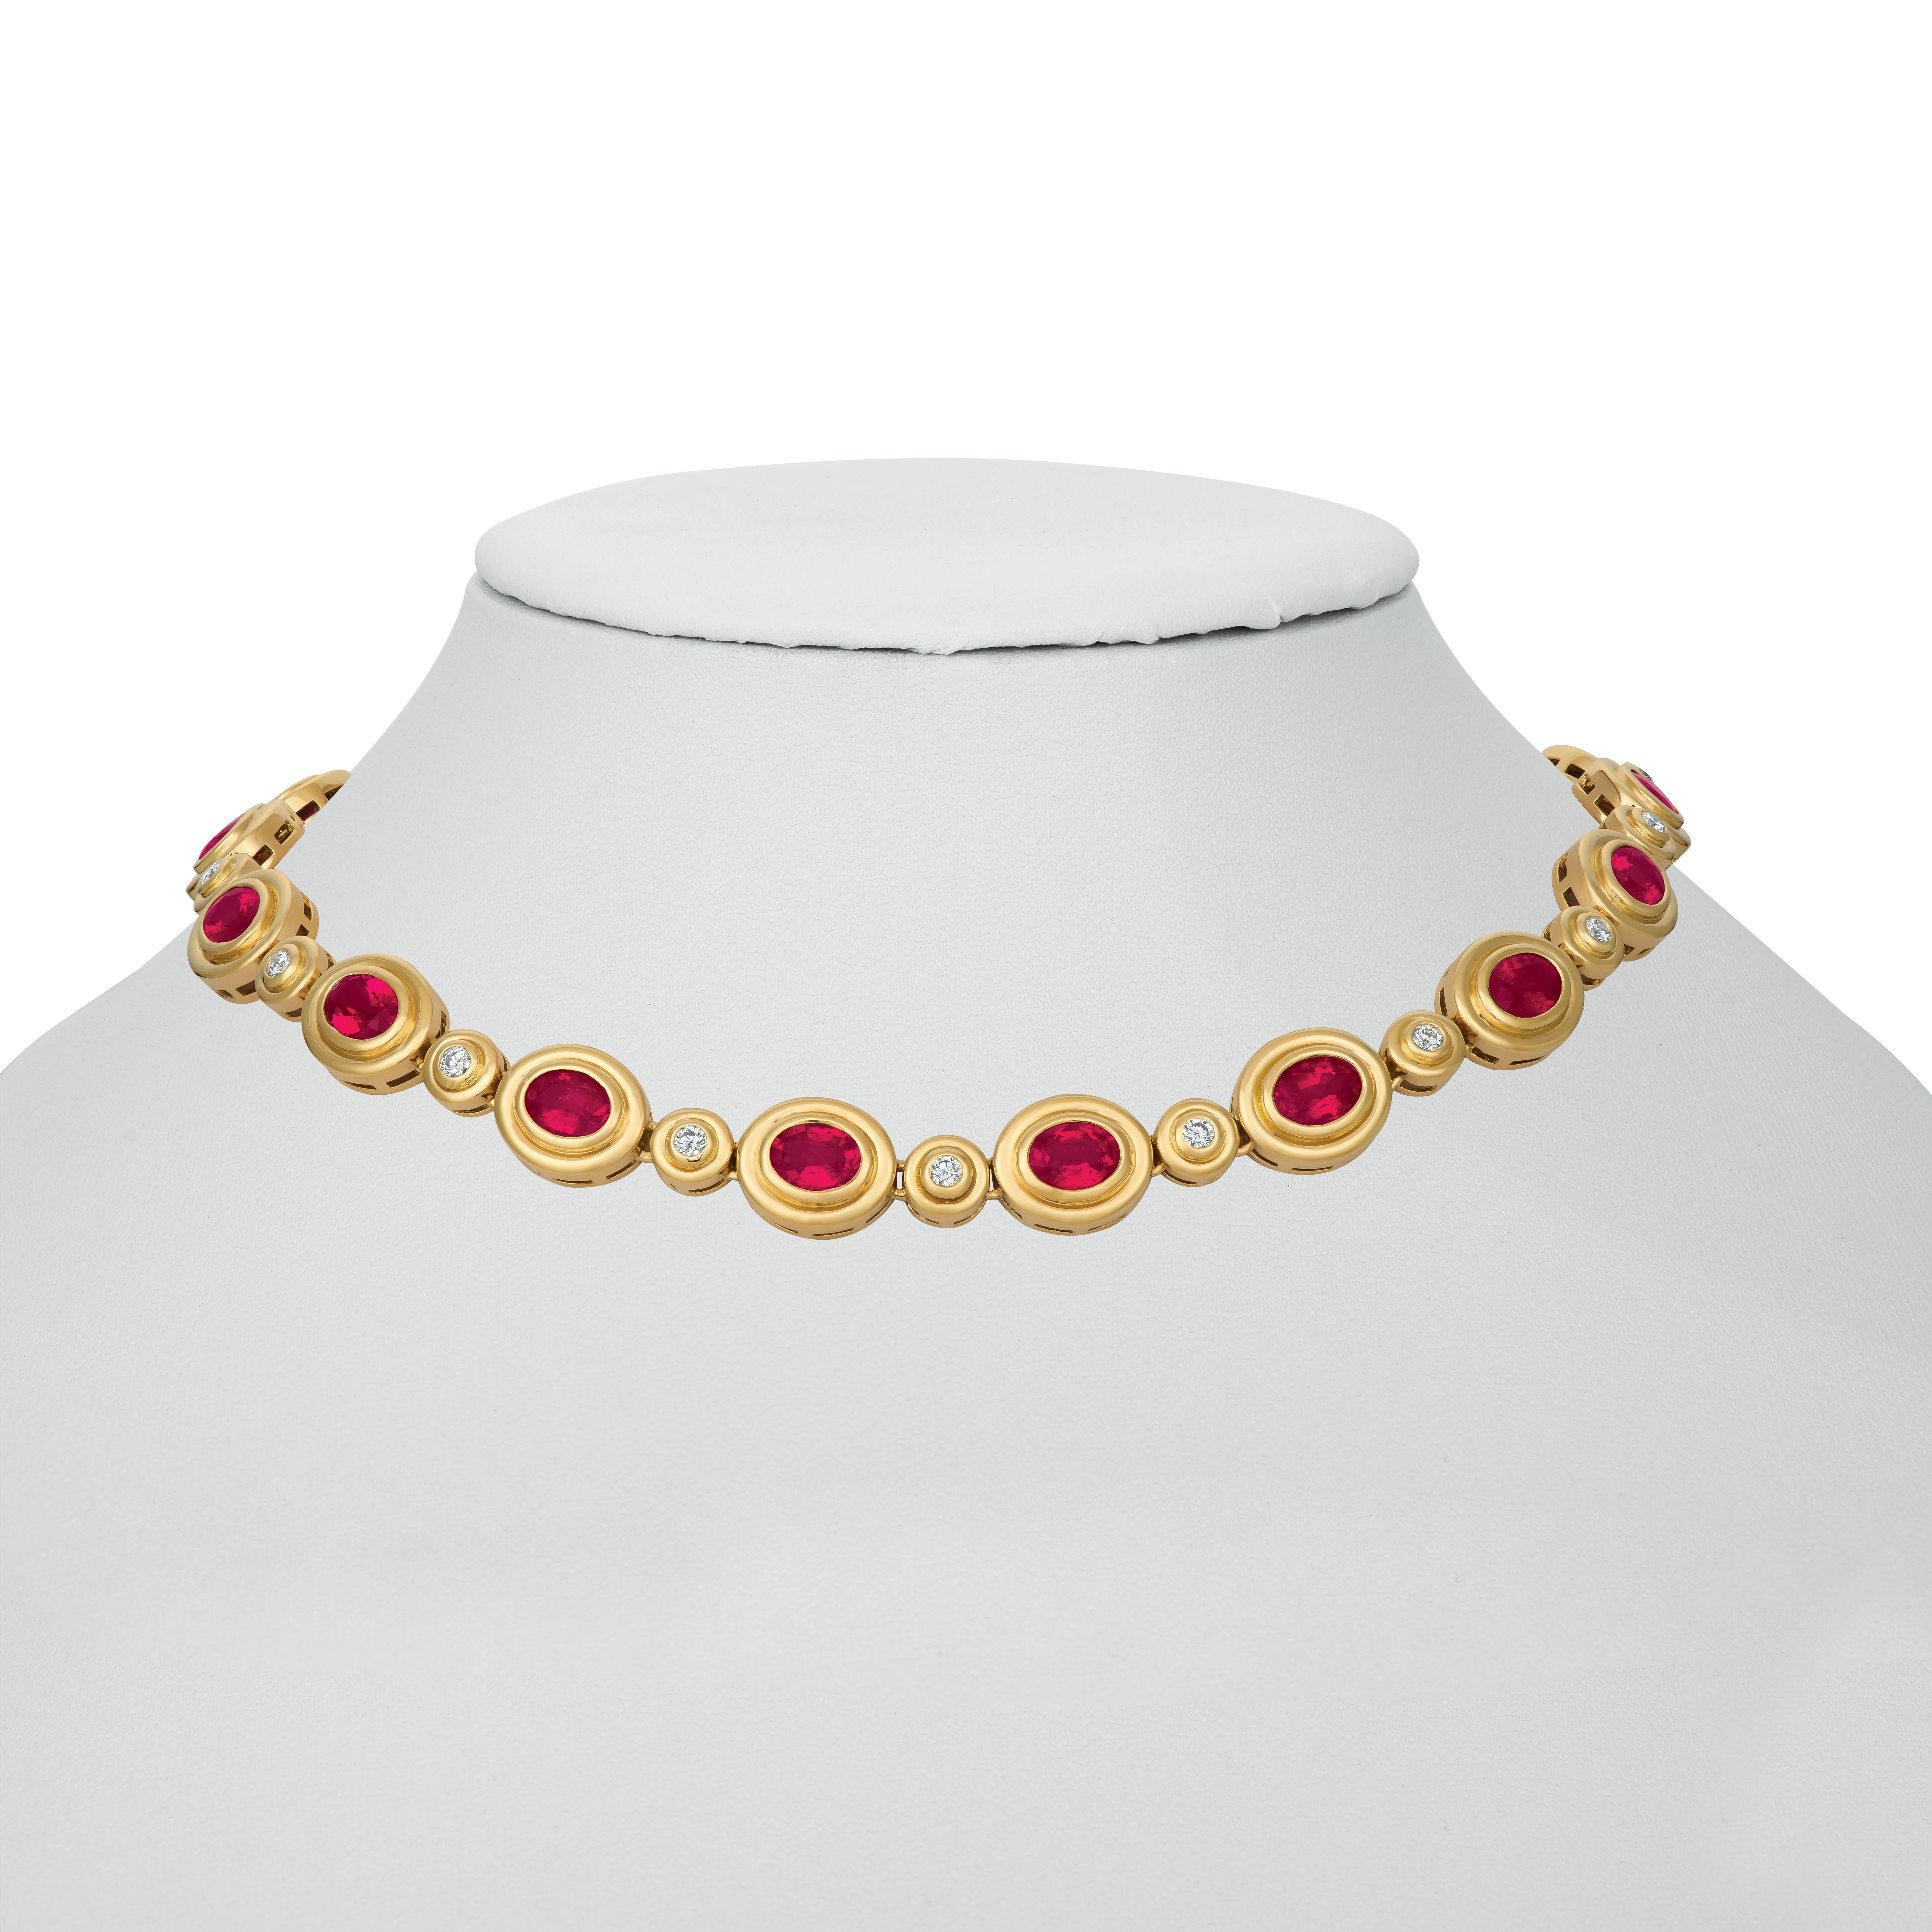 Classic, clean line 18 karat yellow gold necklace. This tailored piece, set with 21.00 carats of gem quality oval Rubelite each separated with a diamond totaling 1.80 carats, is an easy everyday wear.